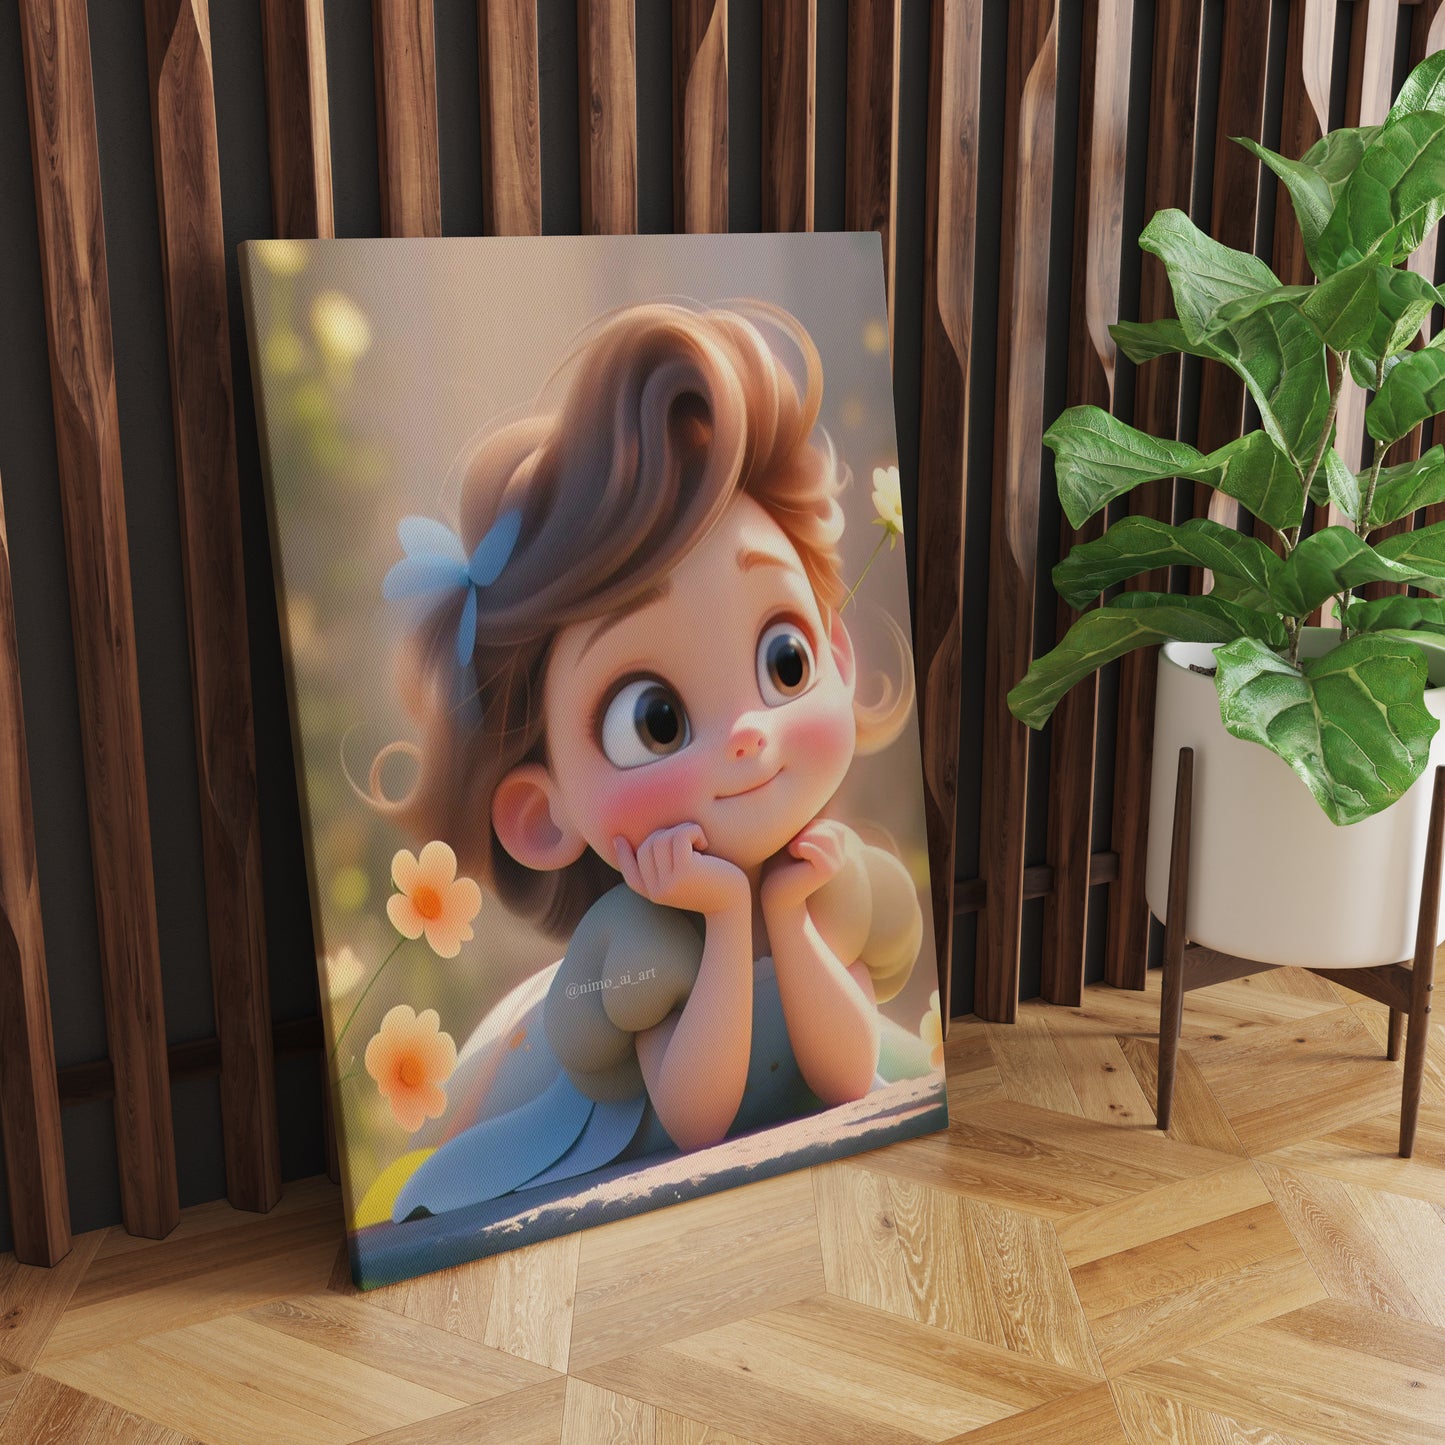 Blossoming Innocence: A Wall Art Celebrating Cute Baby Girls in a Enchanting Floral Backdrop - Embrace the Delicate Beauty of Youth and Nature's Splendor - S05E70